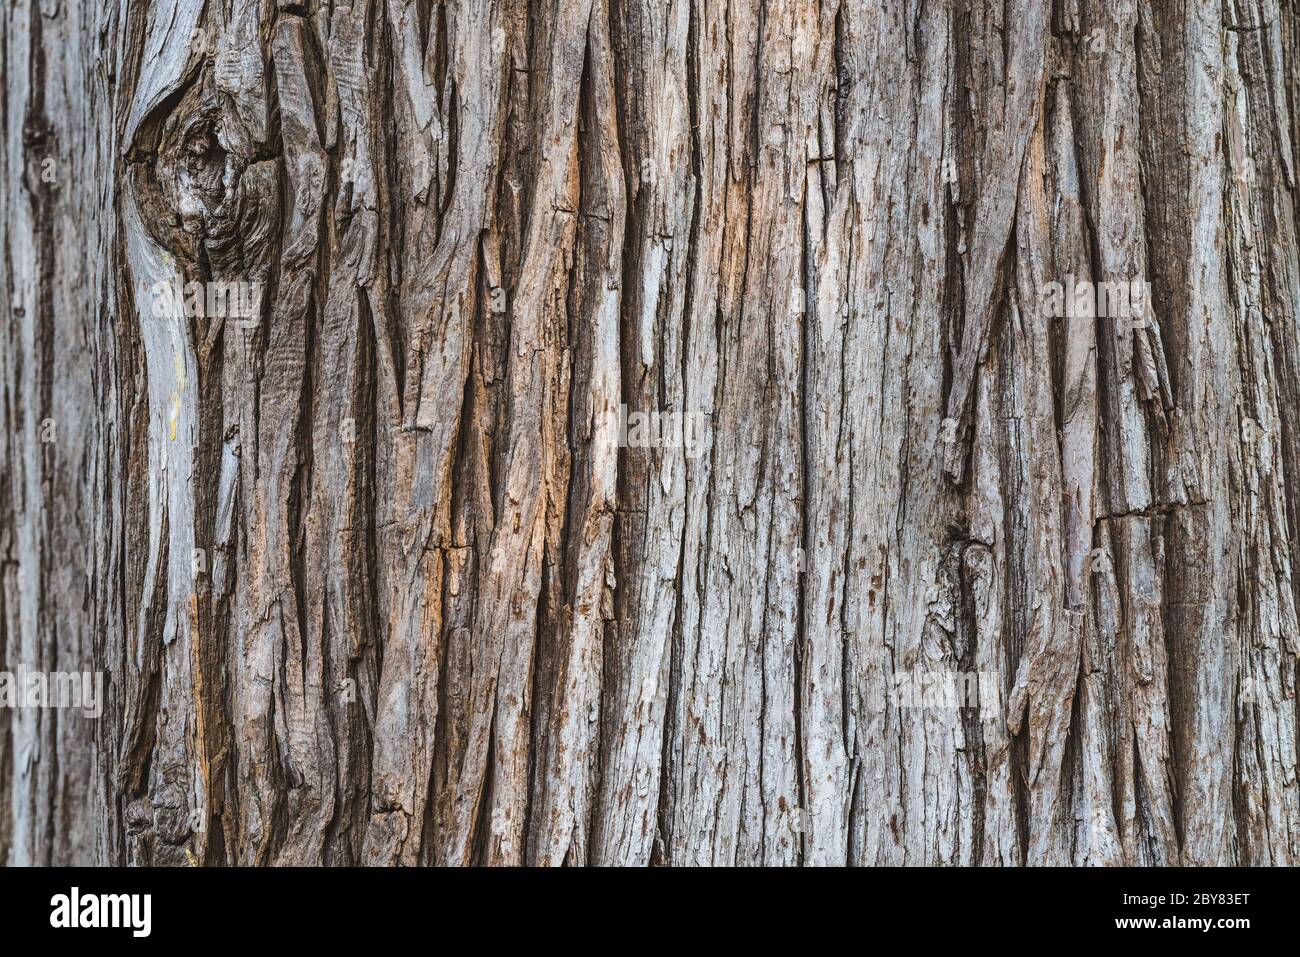 Texture of a bark of Cryptomeria Japonica tree commonly known as Japanese Cedar or Japanese Sugi Pine Stock Photo